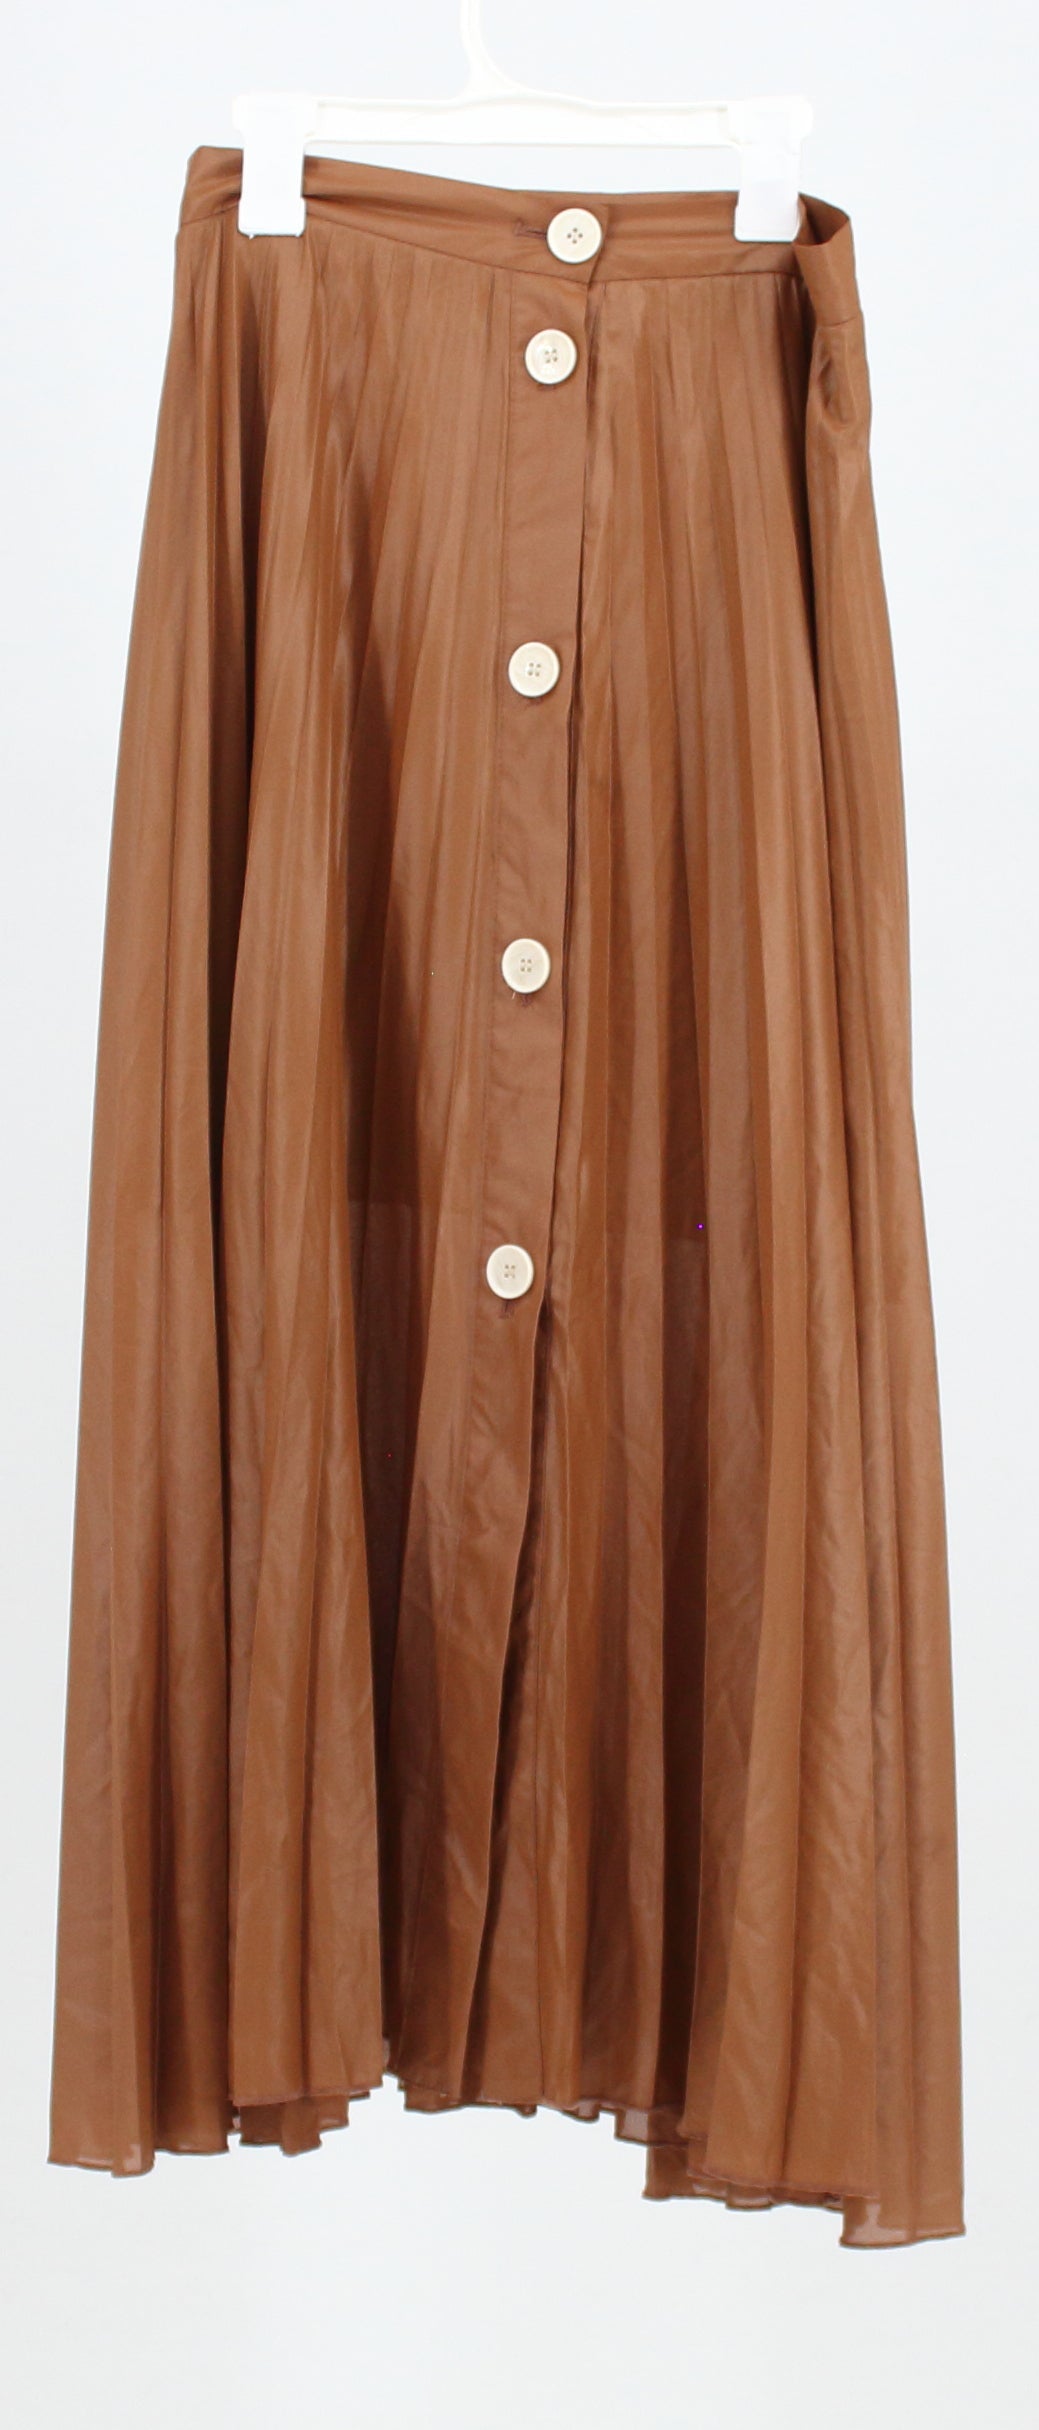 Zara Tan Pleated Maxi Skirt with Button Closures on Front